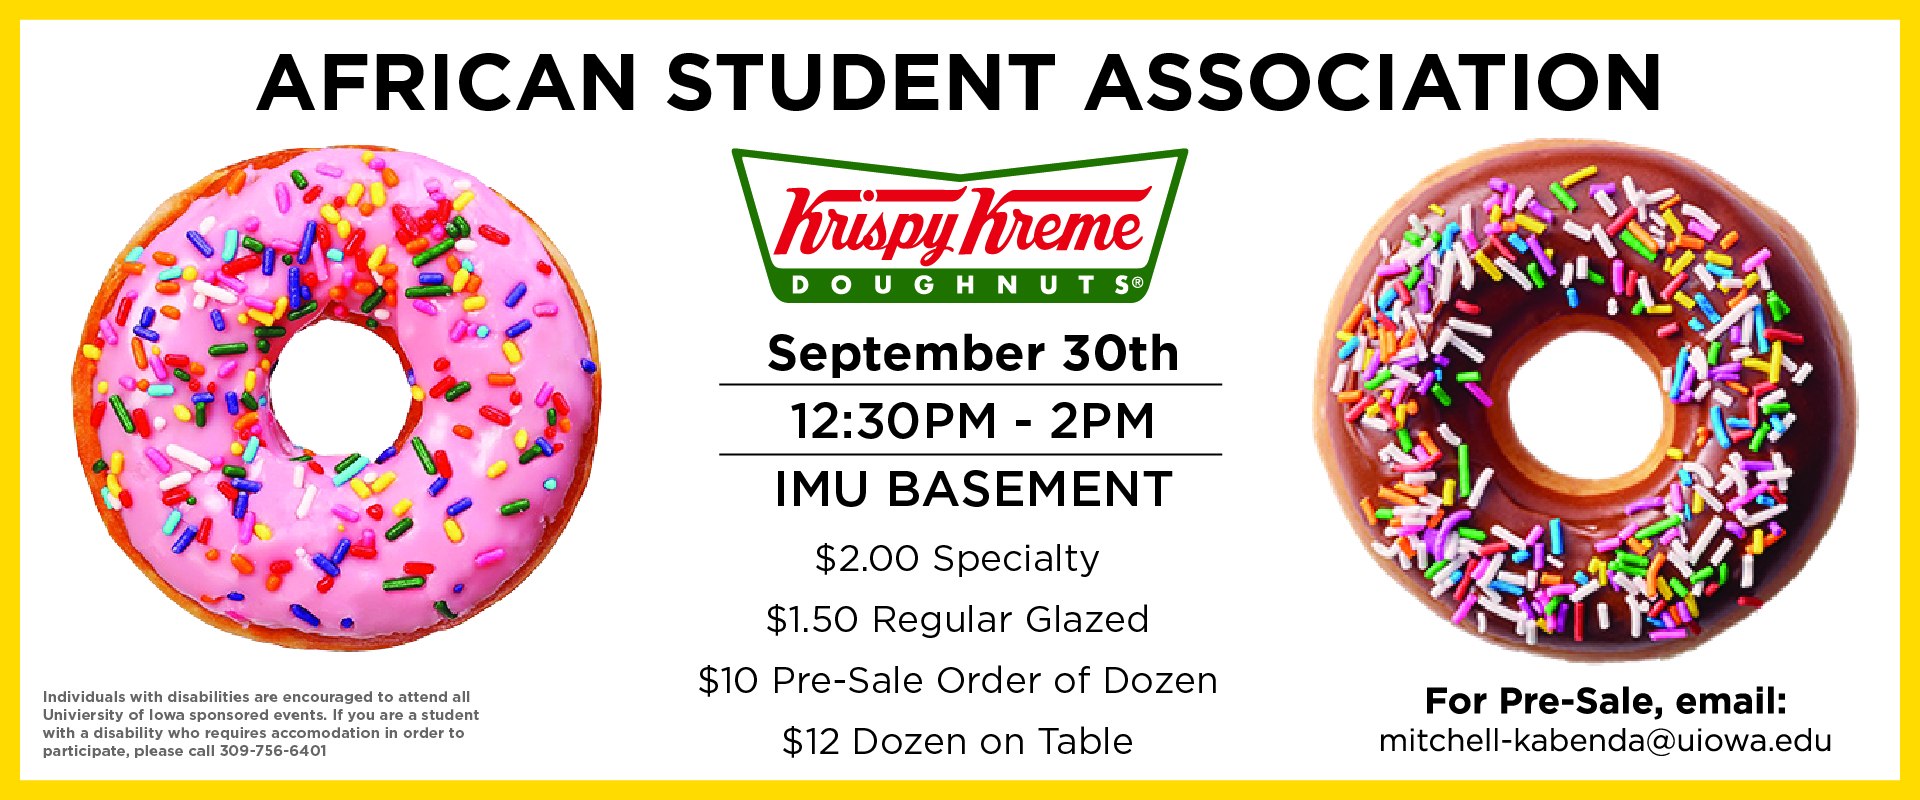 African Student Fundraiser Donuts September 30th